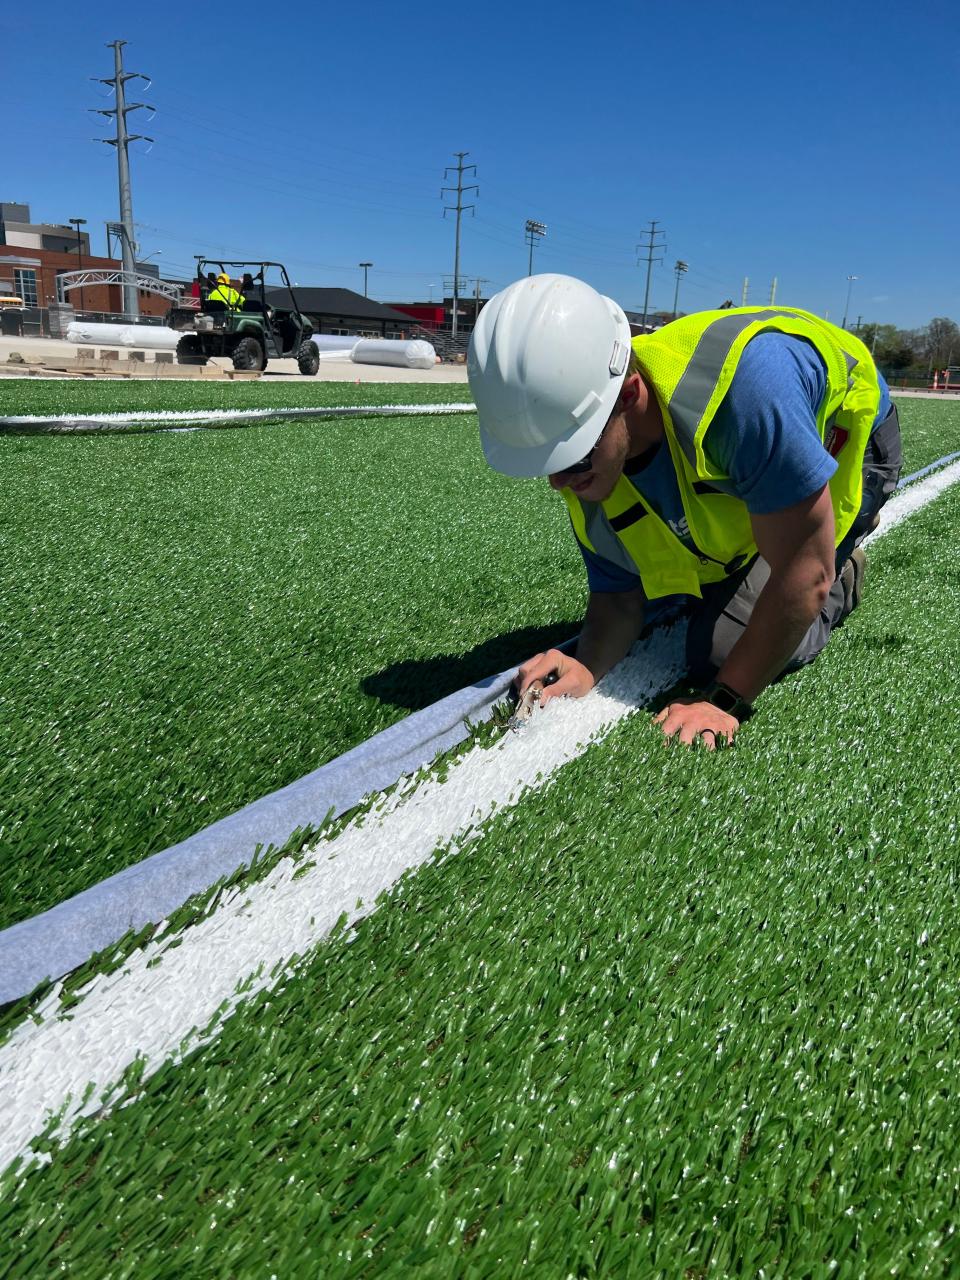 An employee with ForeverLawn works on the artificial surface being installed at the youth fields under construction at Hall of Fame Village in Canton. ForeverLawn is one of seven companies receiving the Business Excellence Award this Thursday from the Canton Regional Chamber of Commerce. (Submitted photo)